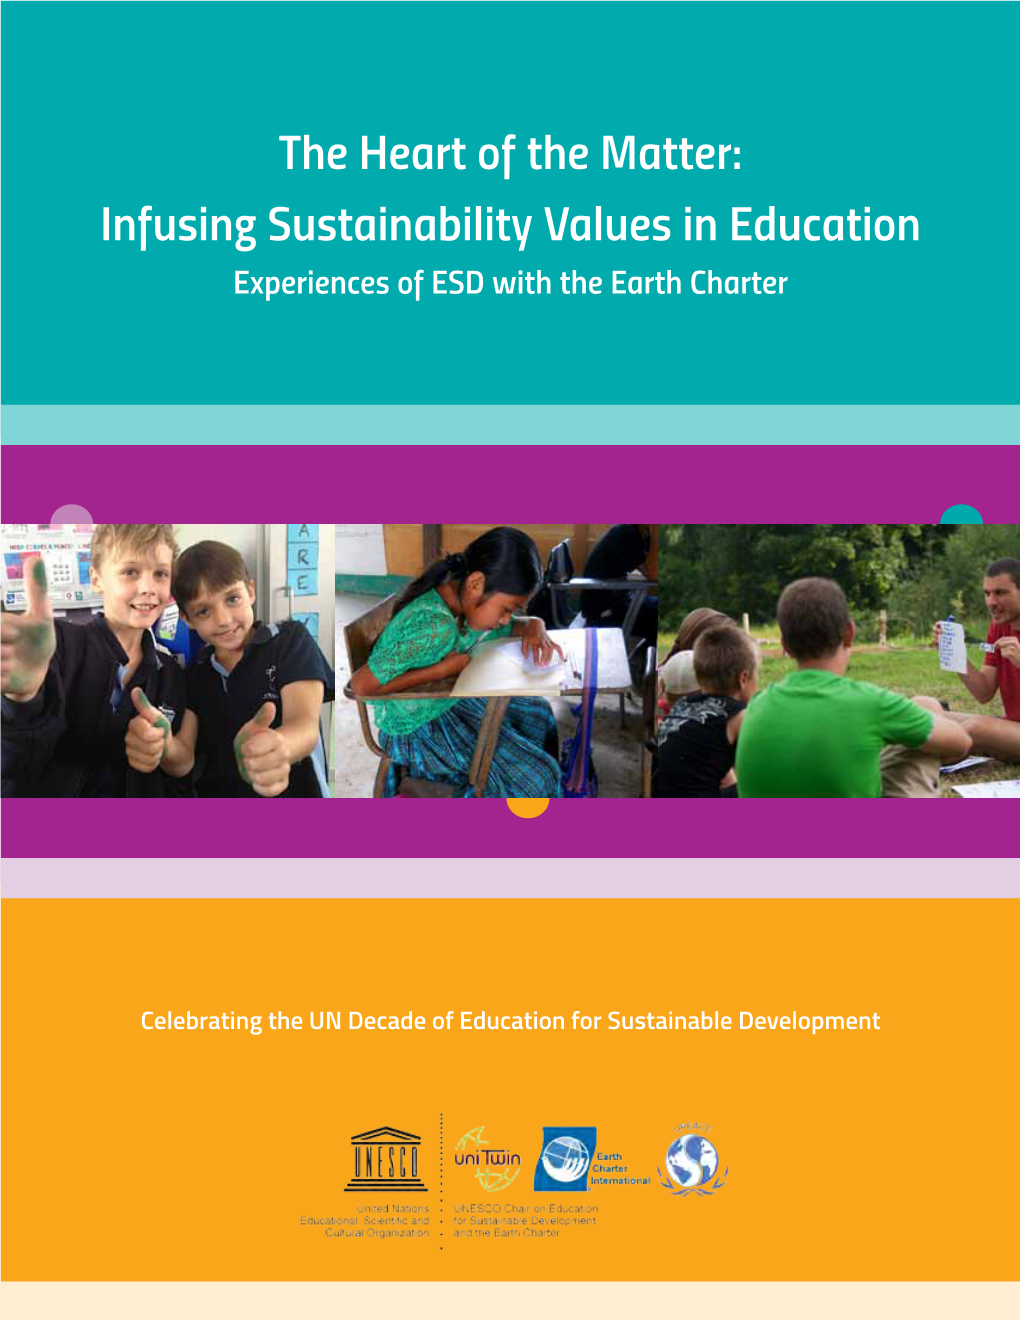 Infusing Sustainability Values in Education Experiences of ESD with the Earth Charter